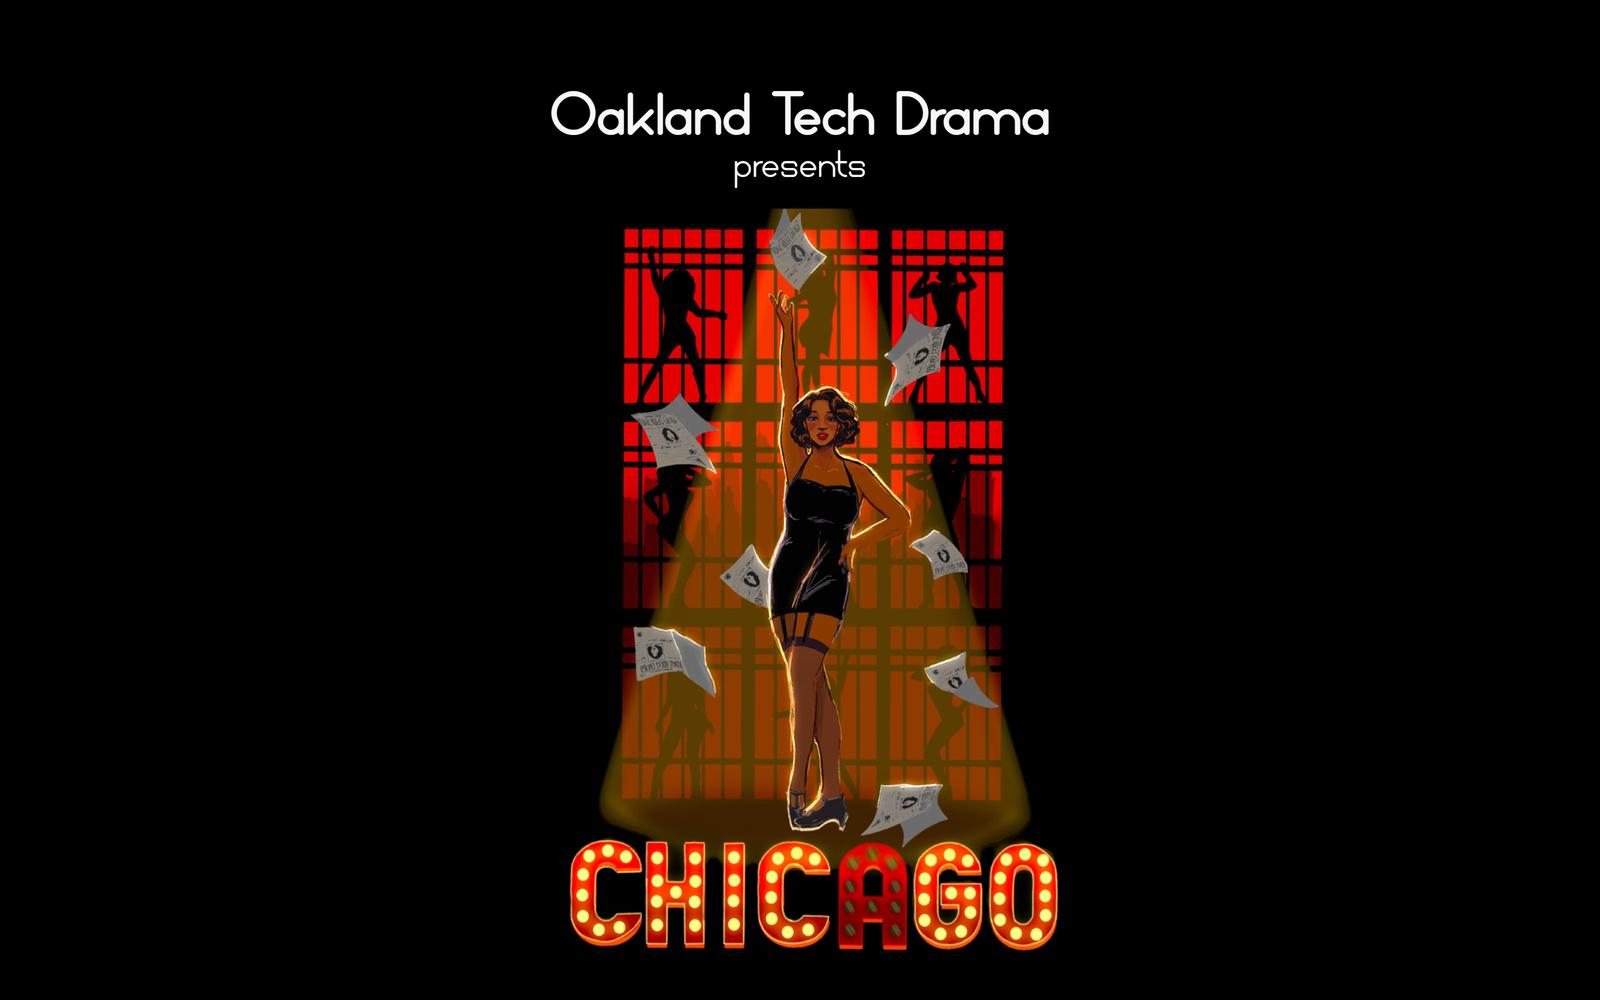 Click here for a sneak peak into rehearsals for CHICAGO the musical.